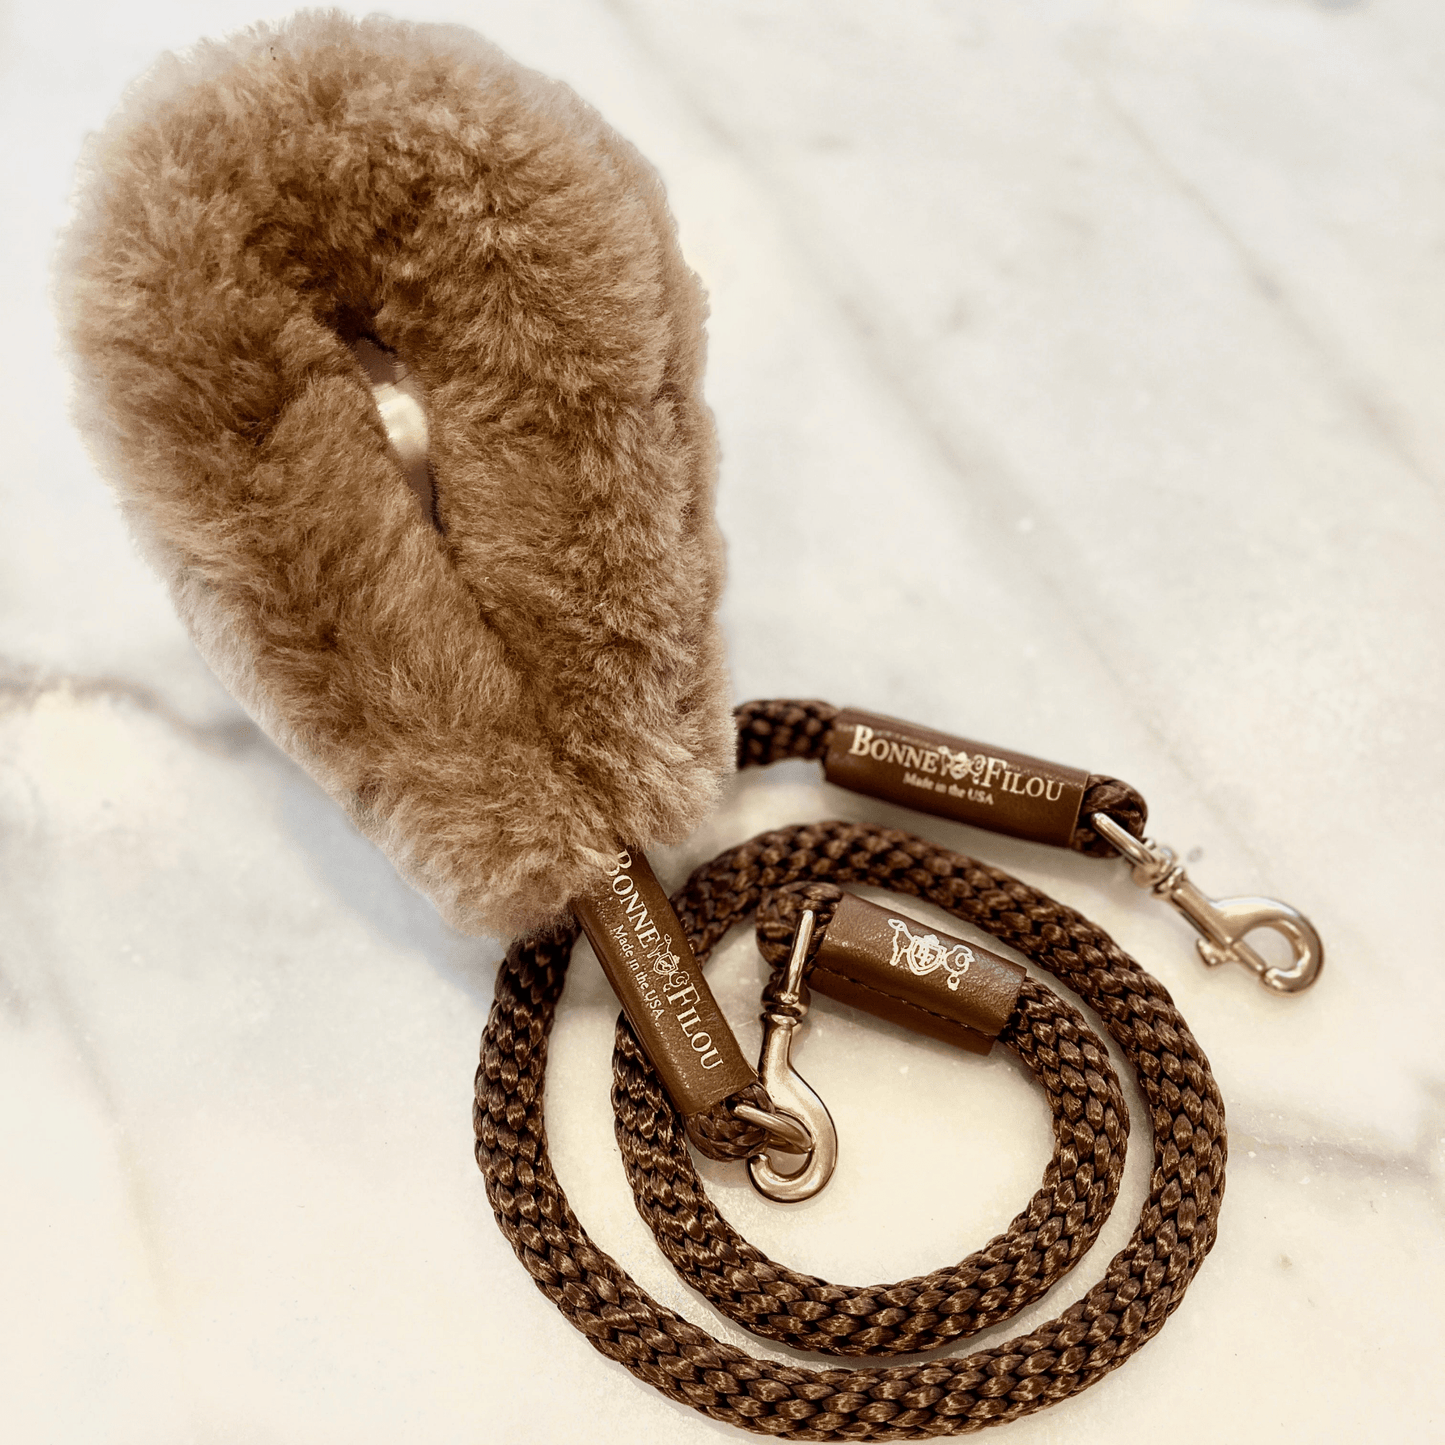 Dog and Pet Stuff Camel Grip + Brown Leash Bundle Shearling Fur Grip + Rope Leash for Dogs